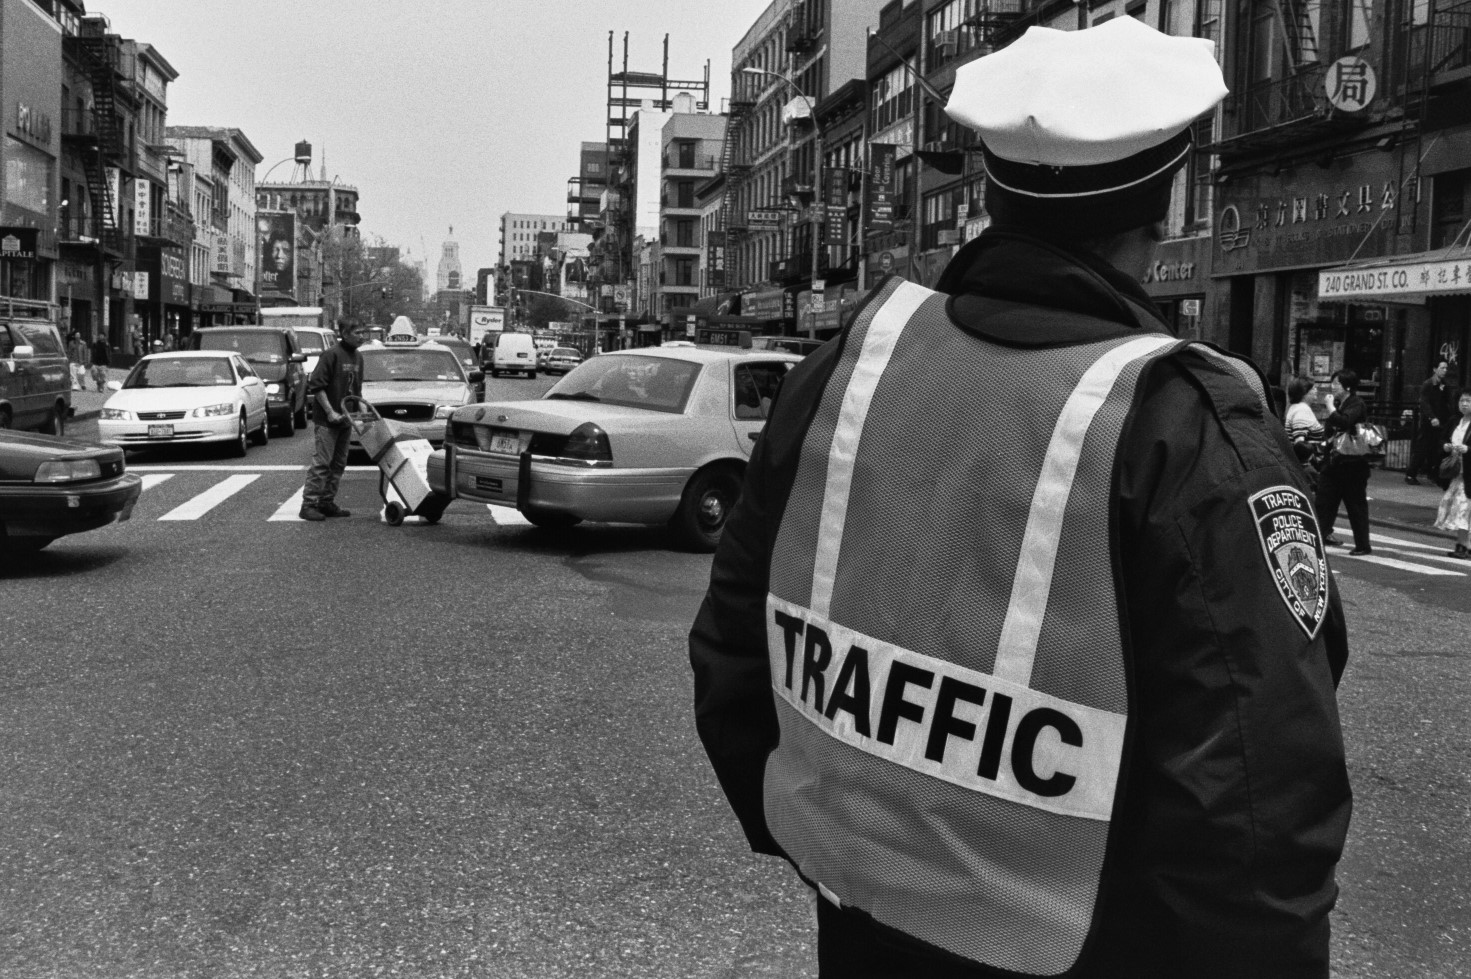 homepage image for New York album, depicting a traffic cop and street crossing